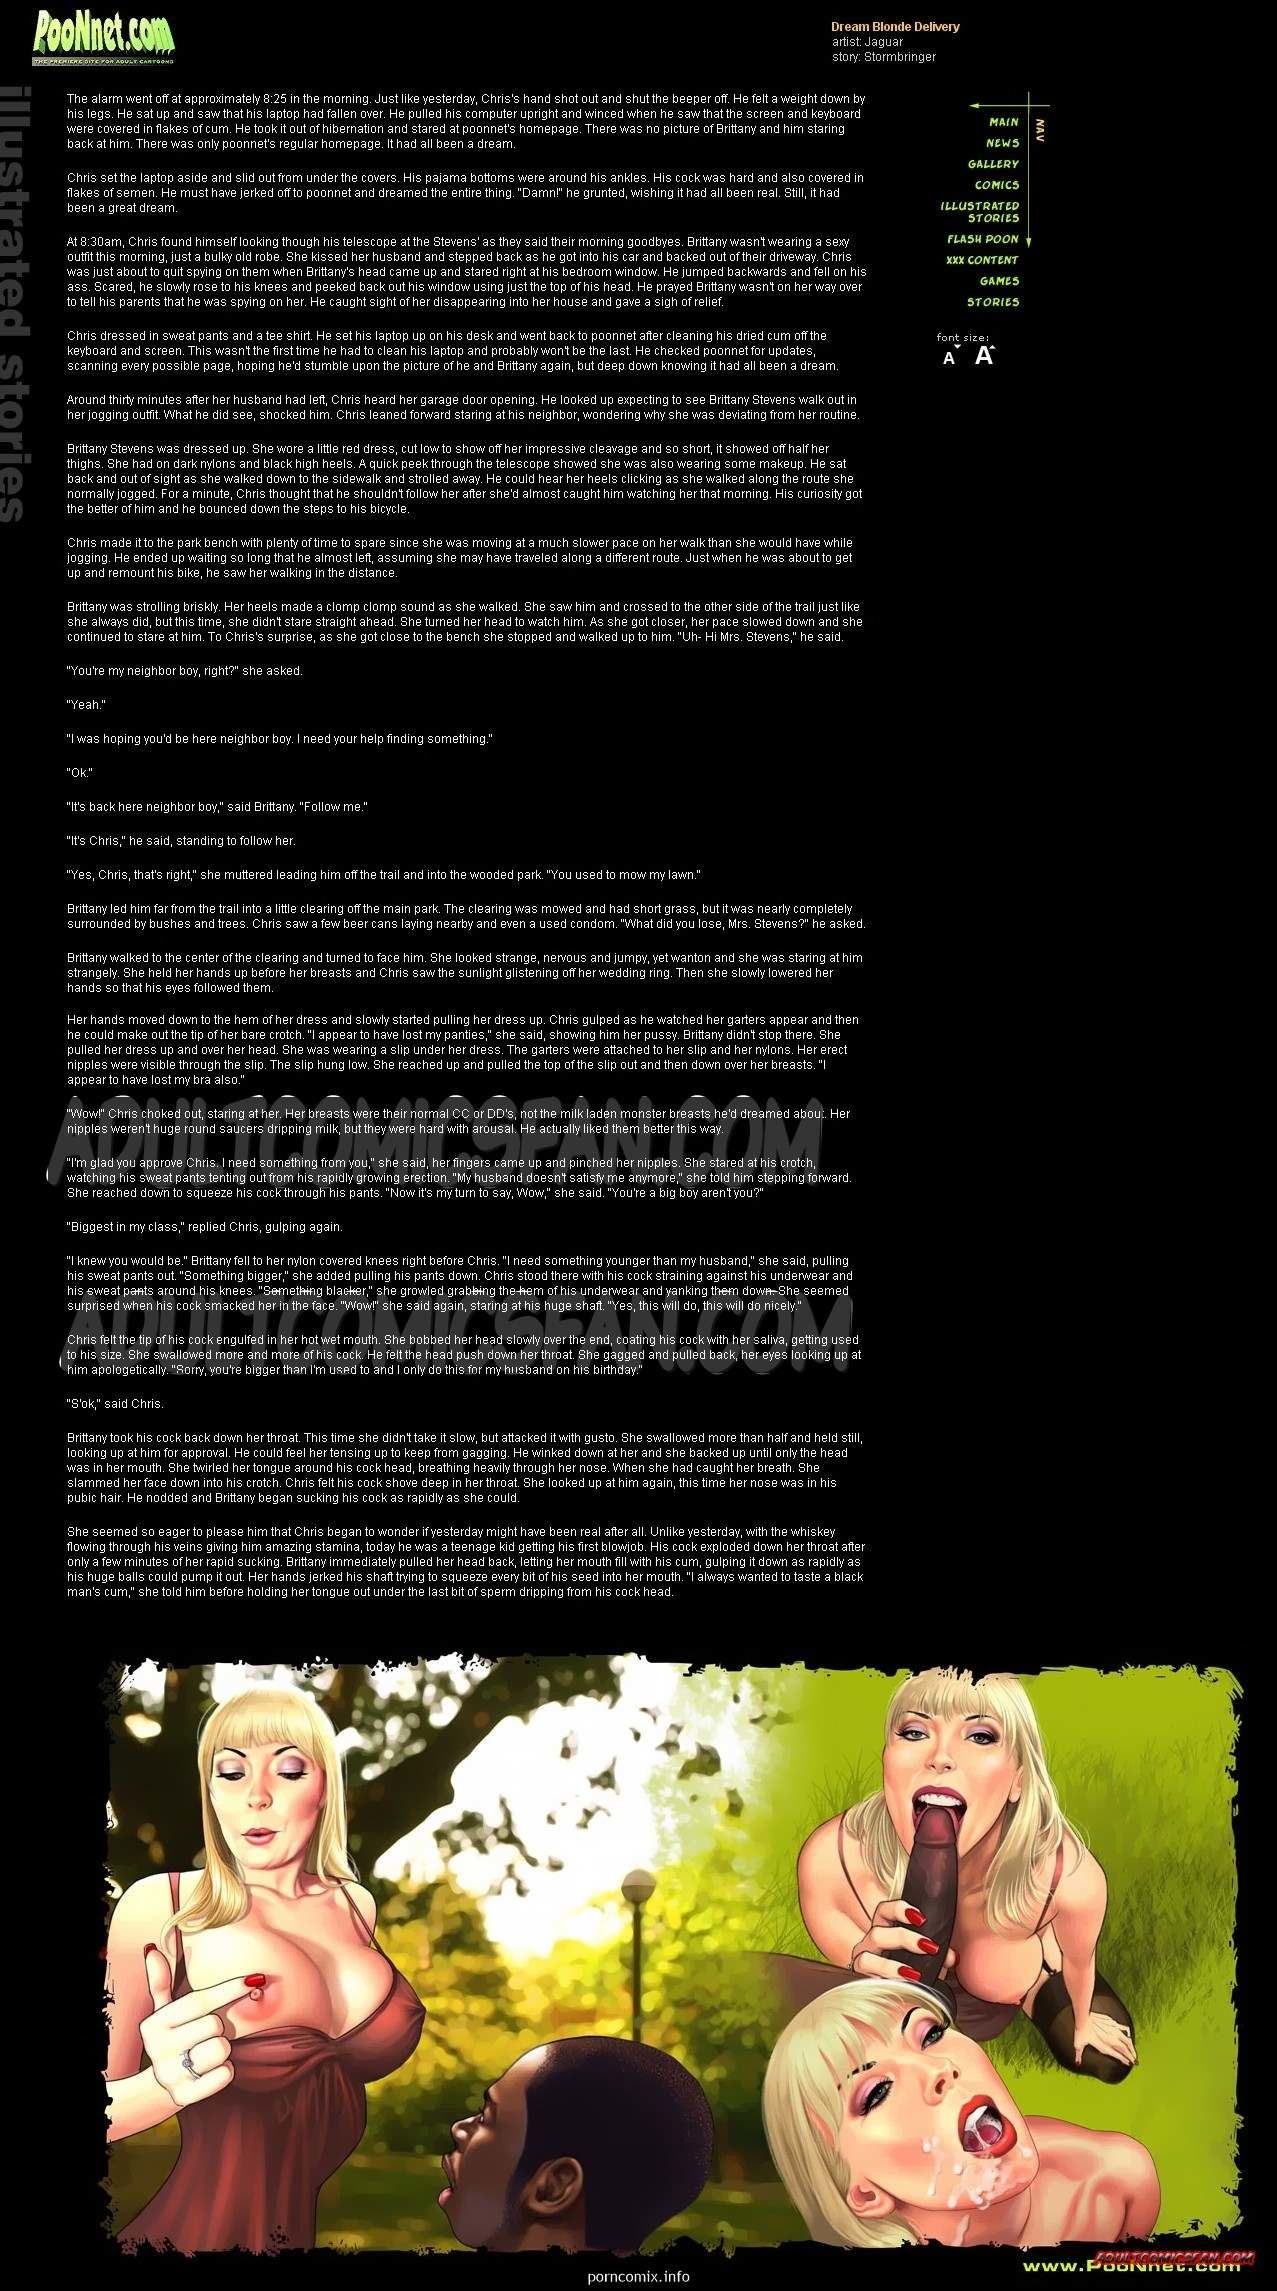 Poonnet - Dream Blonde Delivery page 21